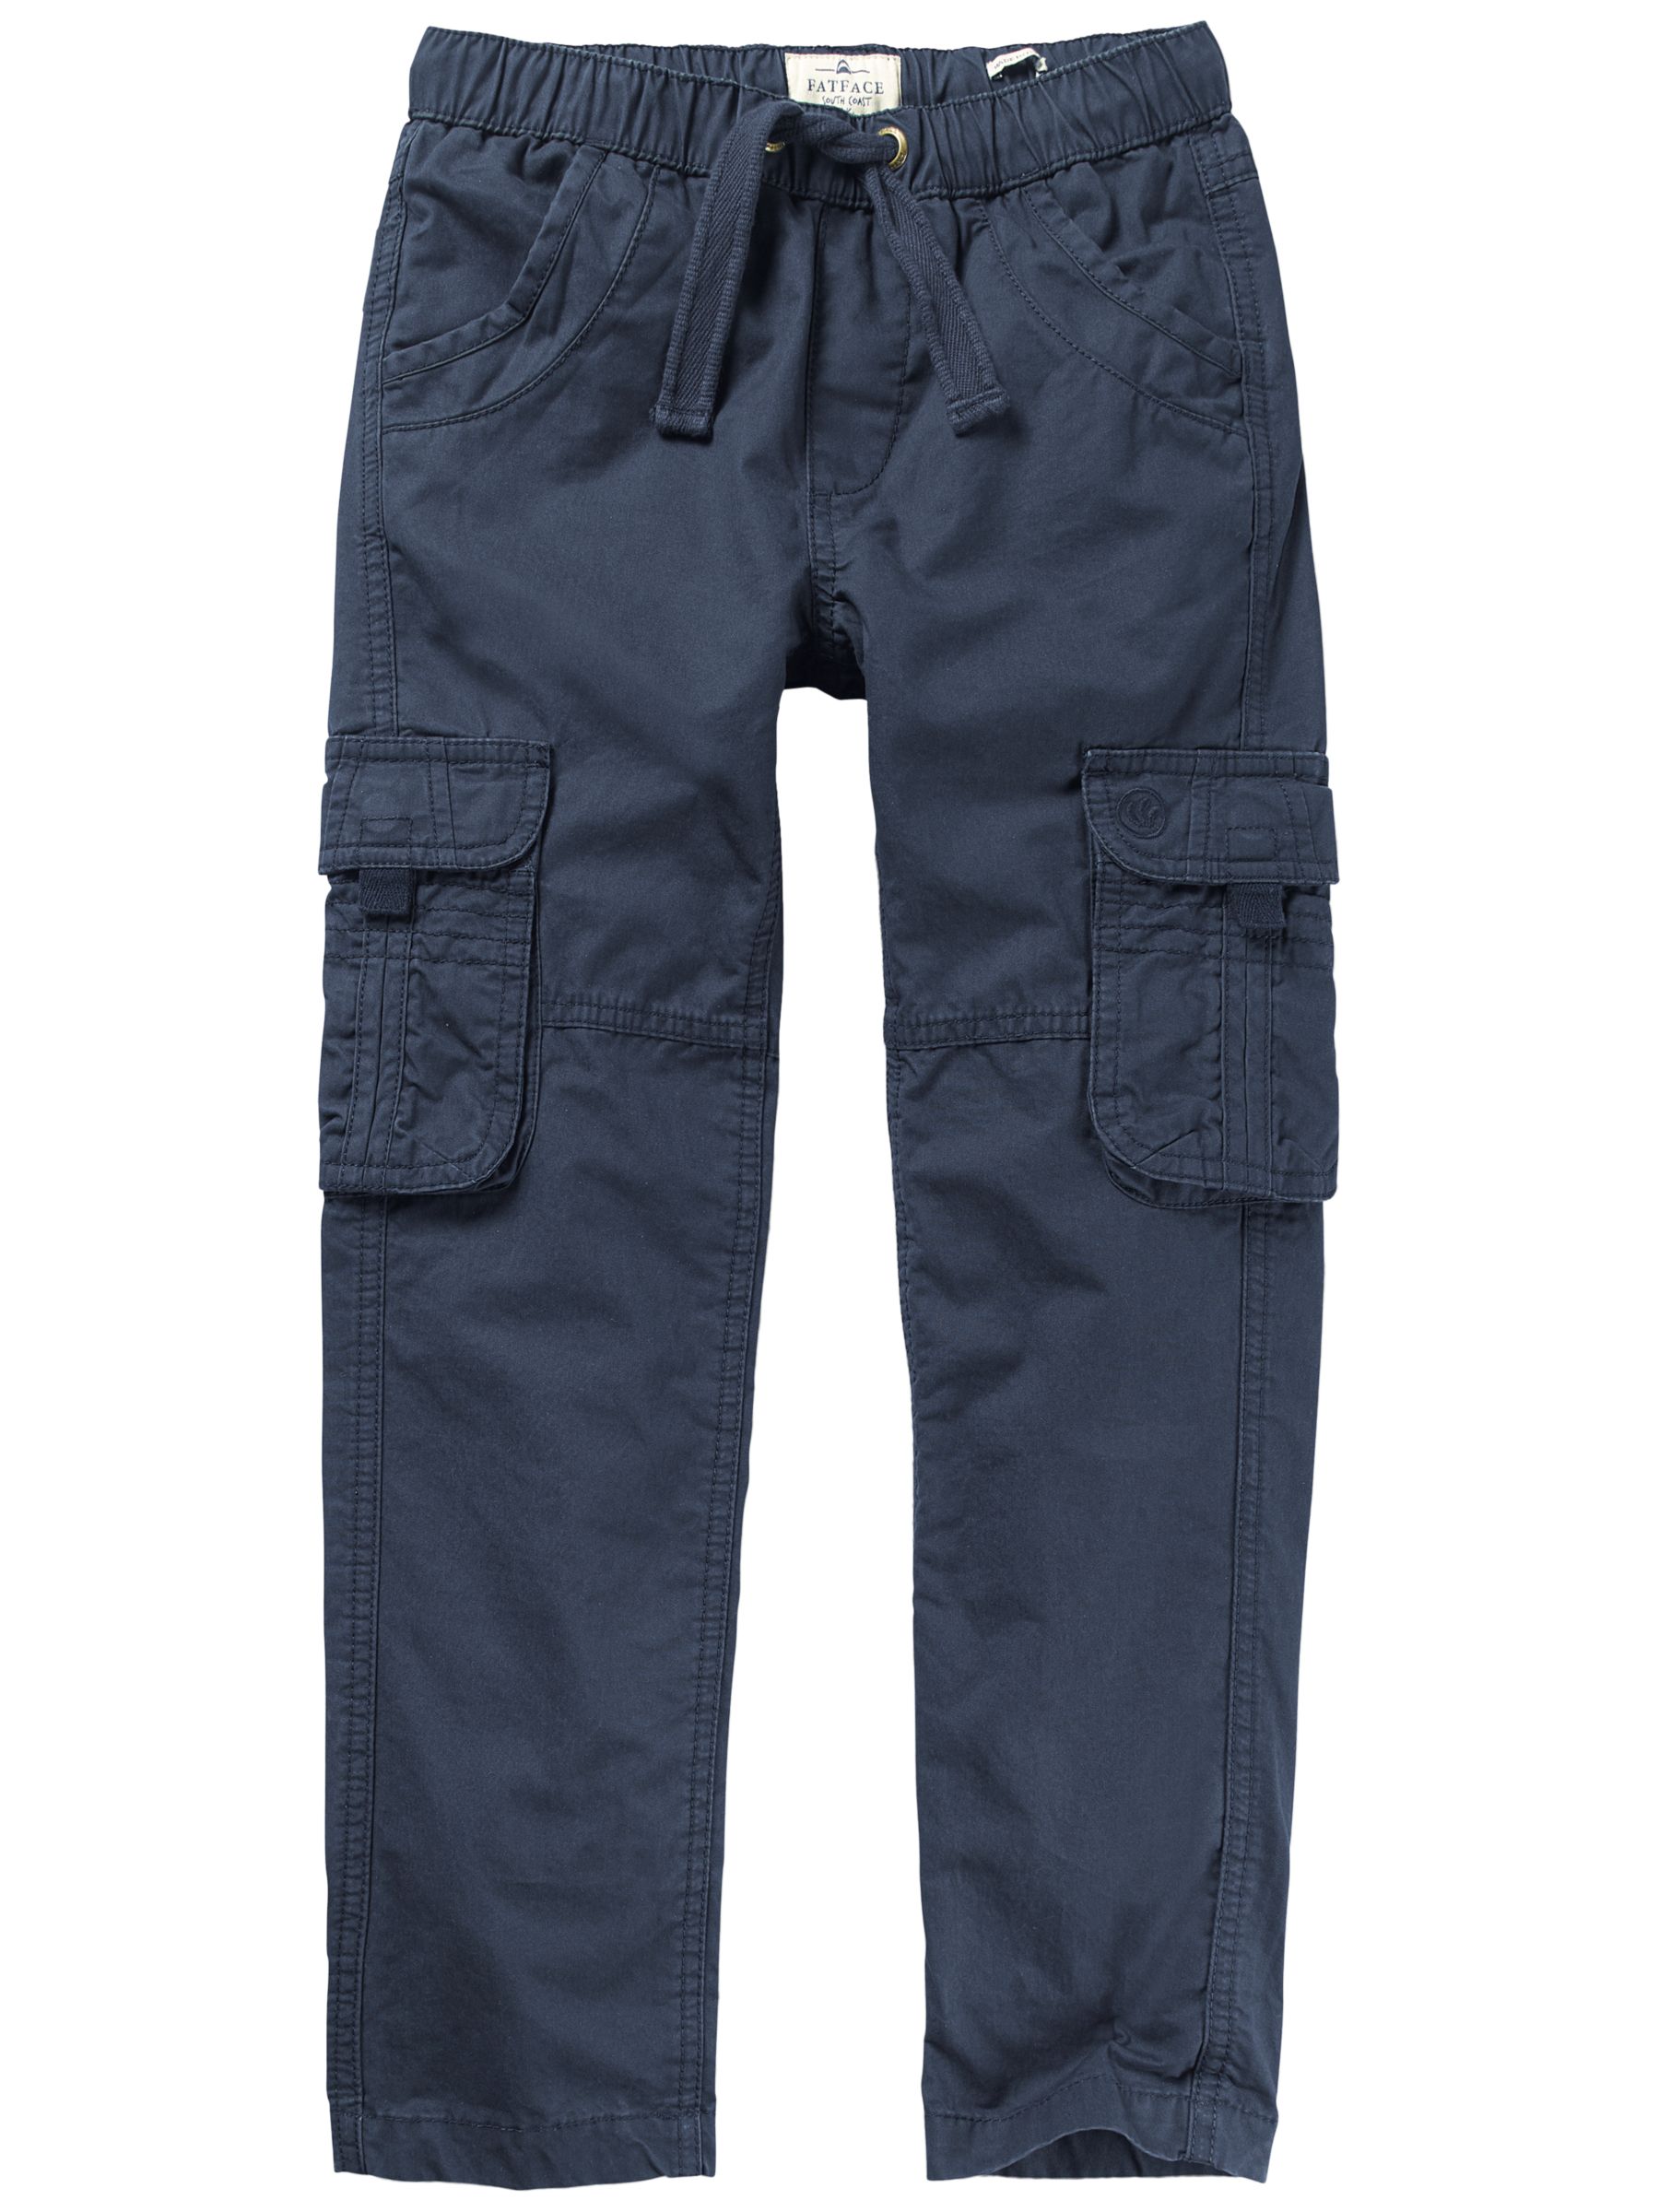 Fat Face Boys' Padstow Cargo Trousers